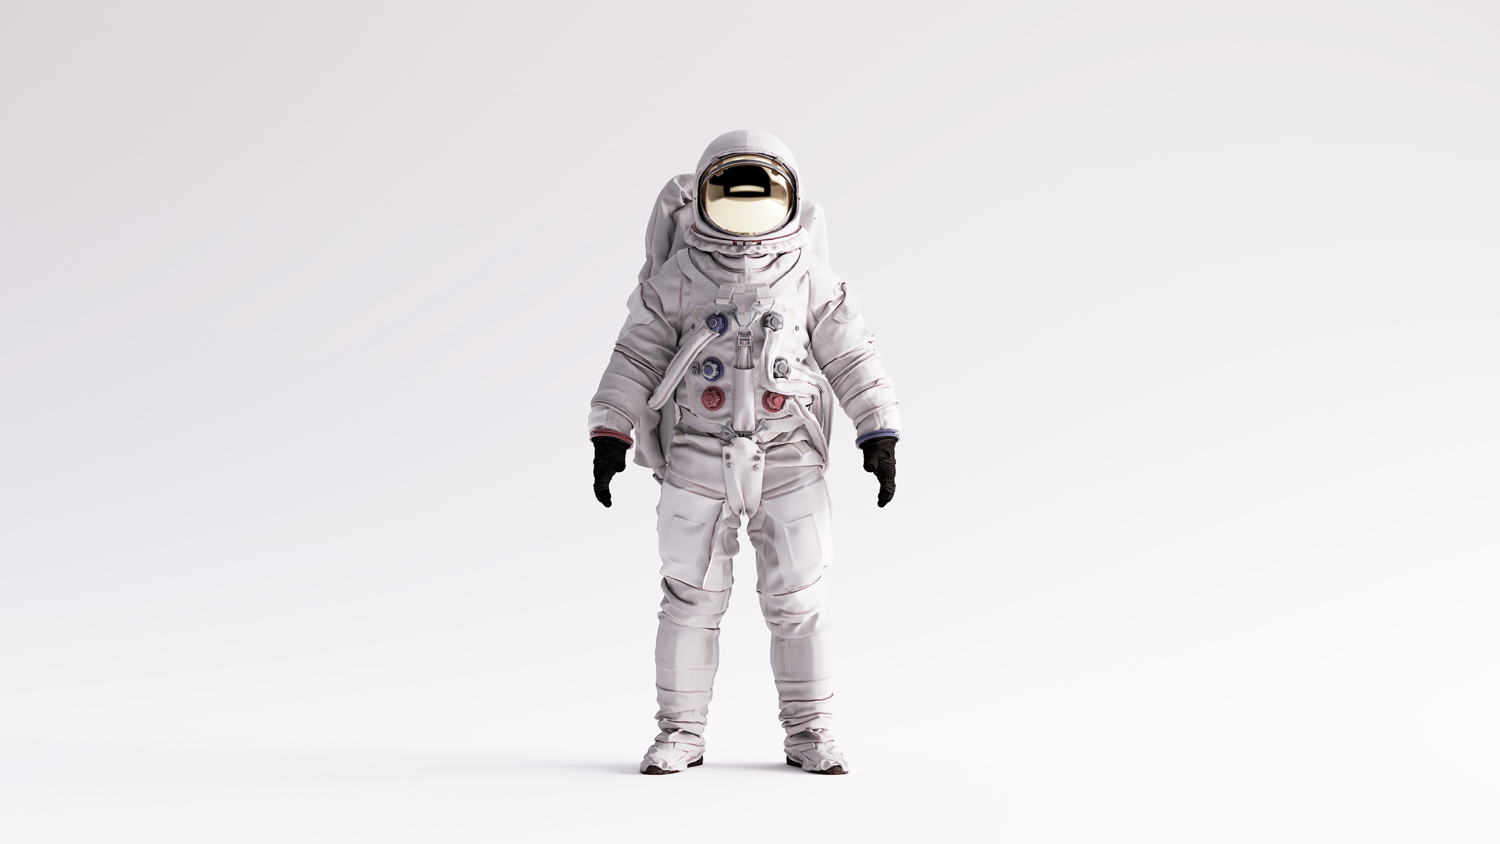 Big Rocket Design 404 page image. Man in spacesuit on white background. Mission aborted. Return to Base.